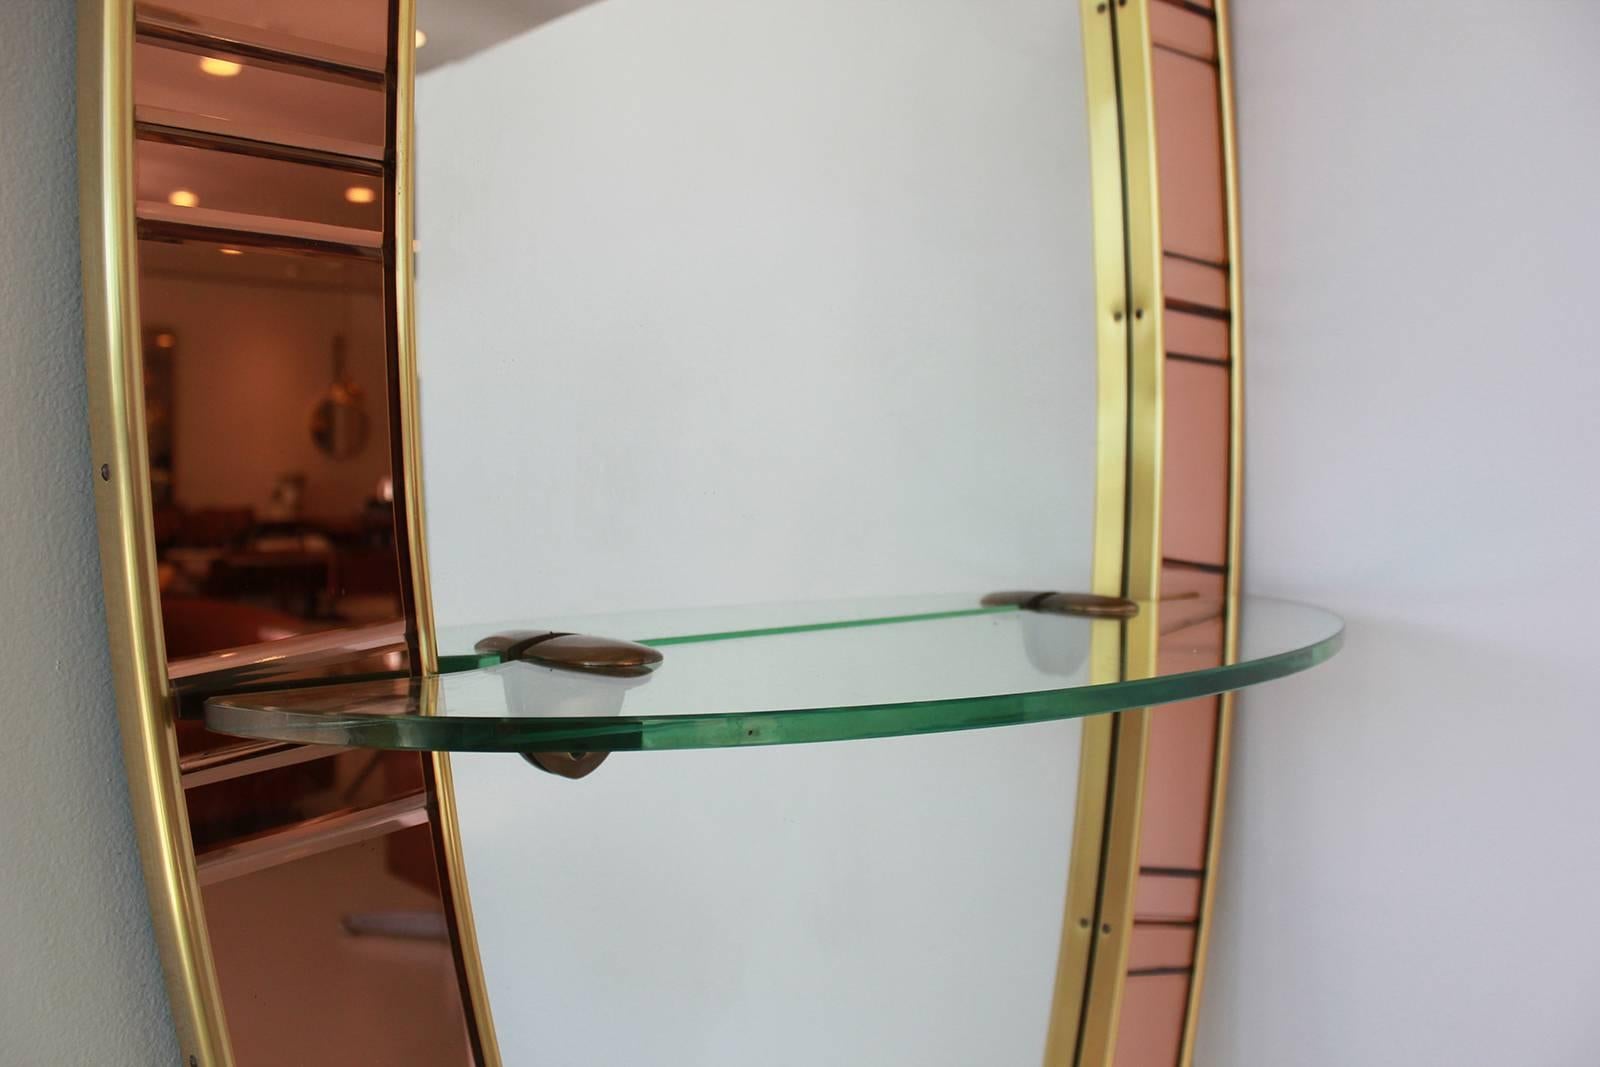 Crystal art mirror with copper colored glass, brass and mirror.
Full length in size with glass shelf.